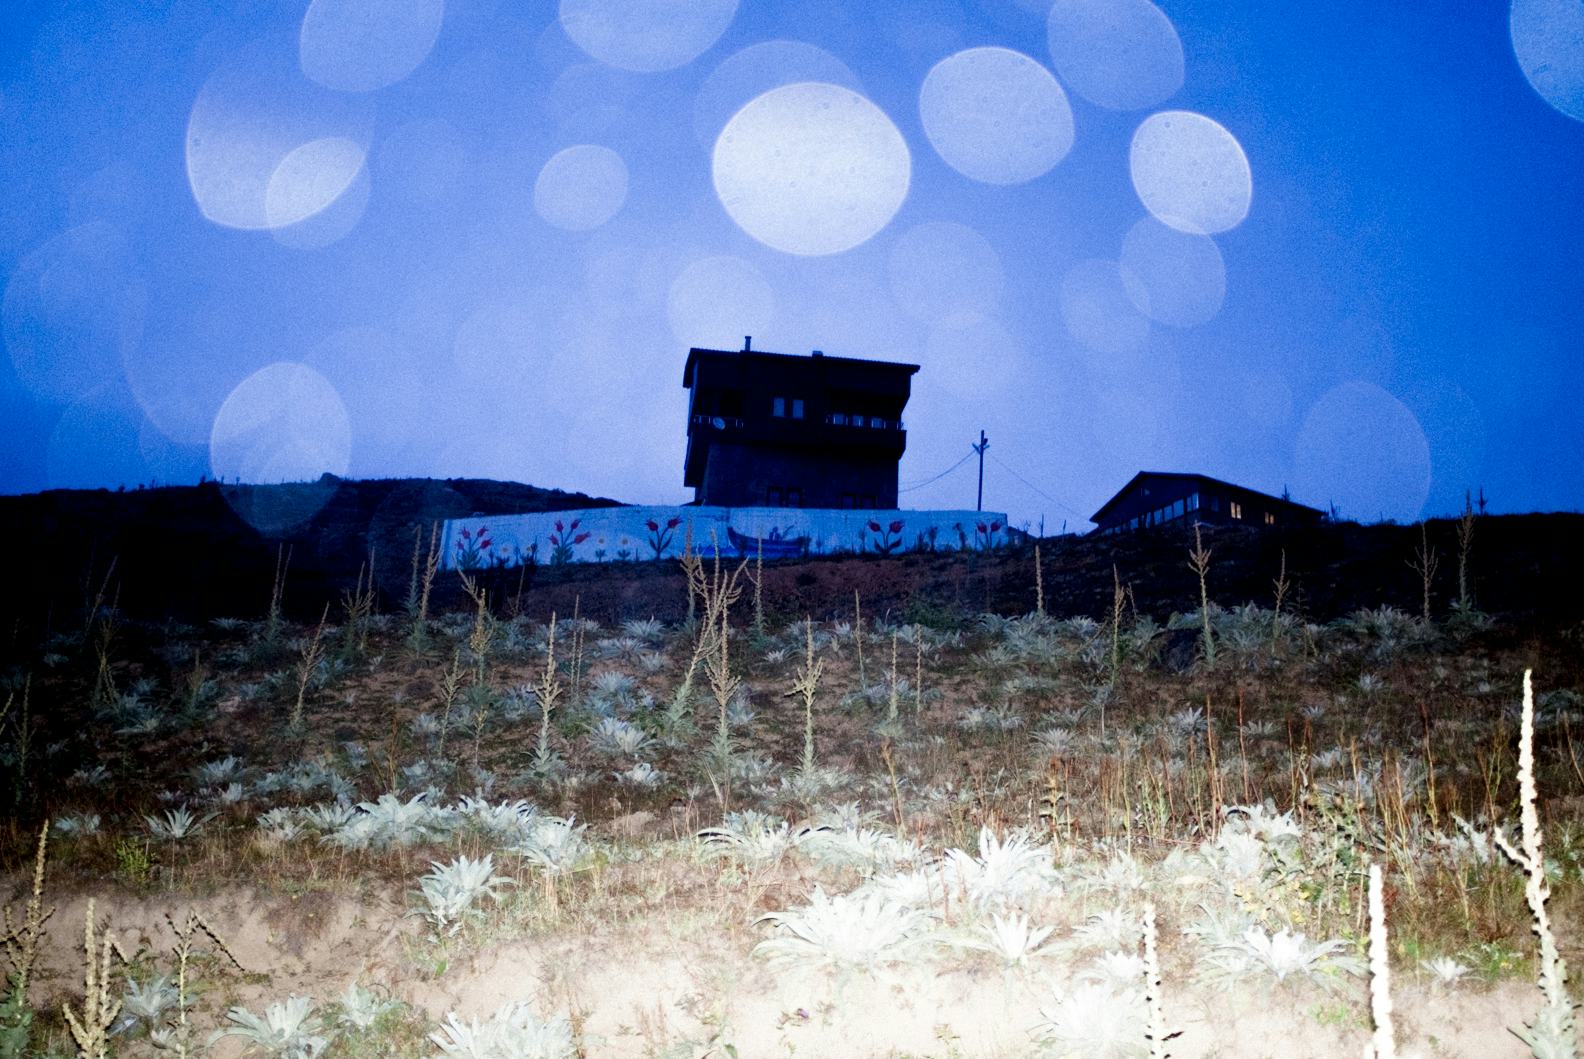 Photo of a house in the Kushmer Highlands in Turkey at night, with flash. The flash lights up the blue night sky. © Cansu Yıldıran